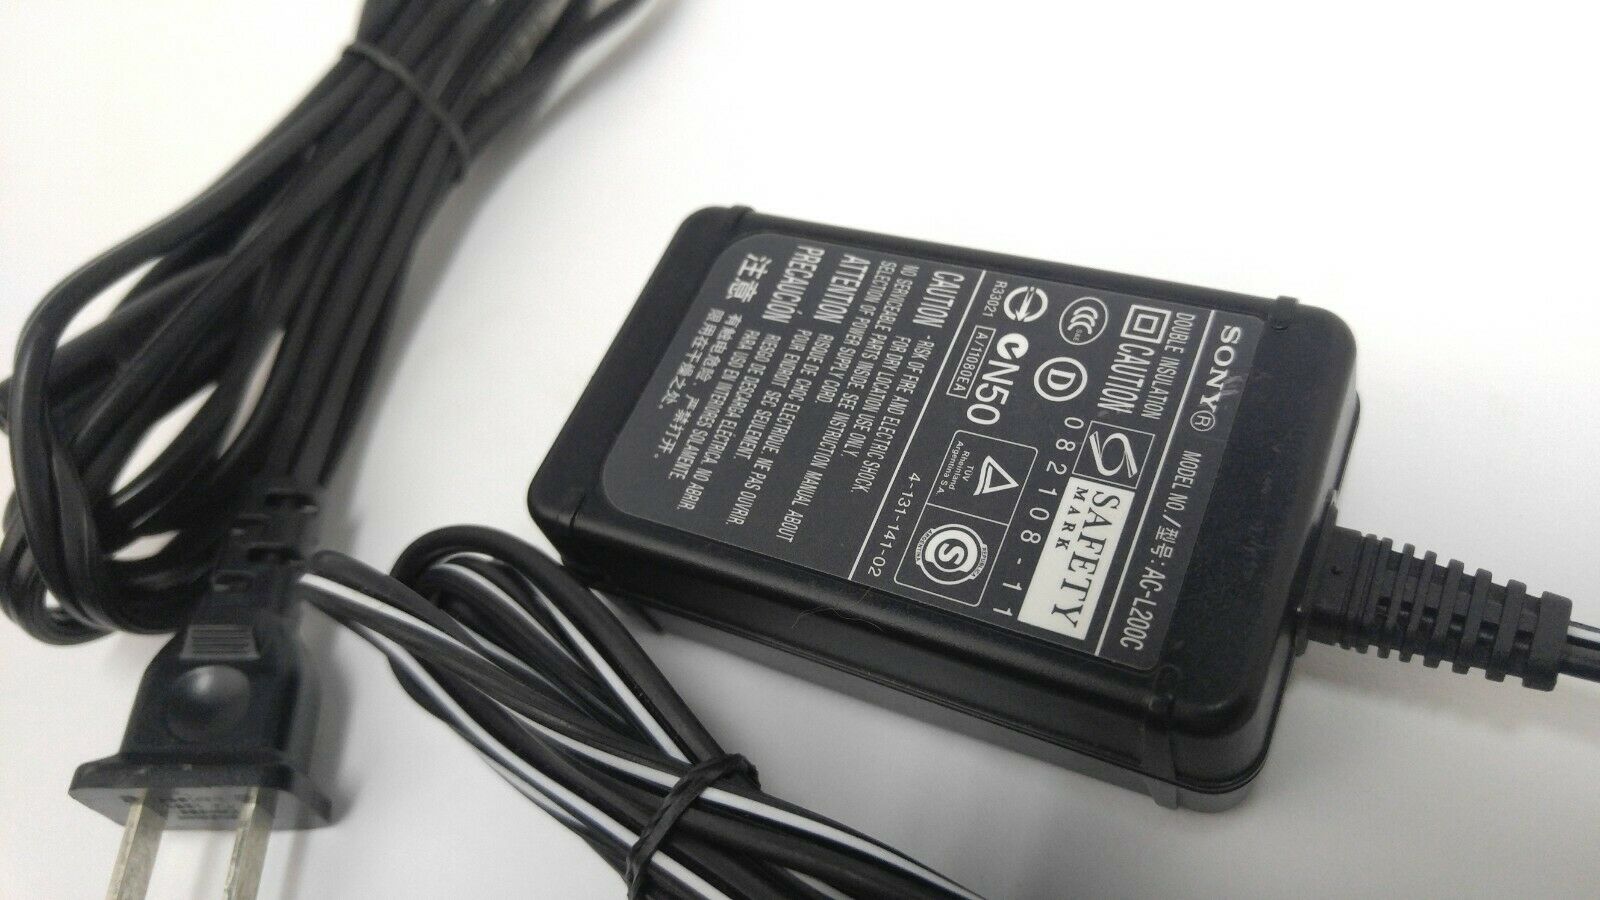 AC-L200C Sony AC Adapter for Handycam DSC-HX100V - Click Image to Close